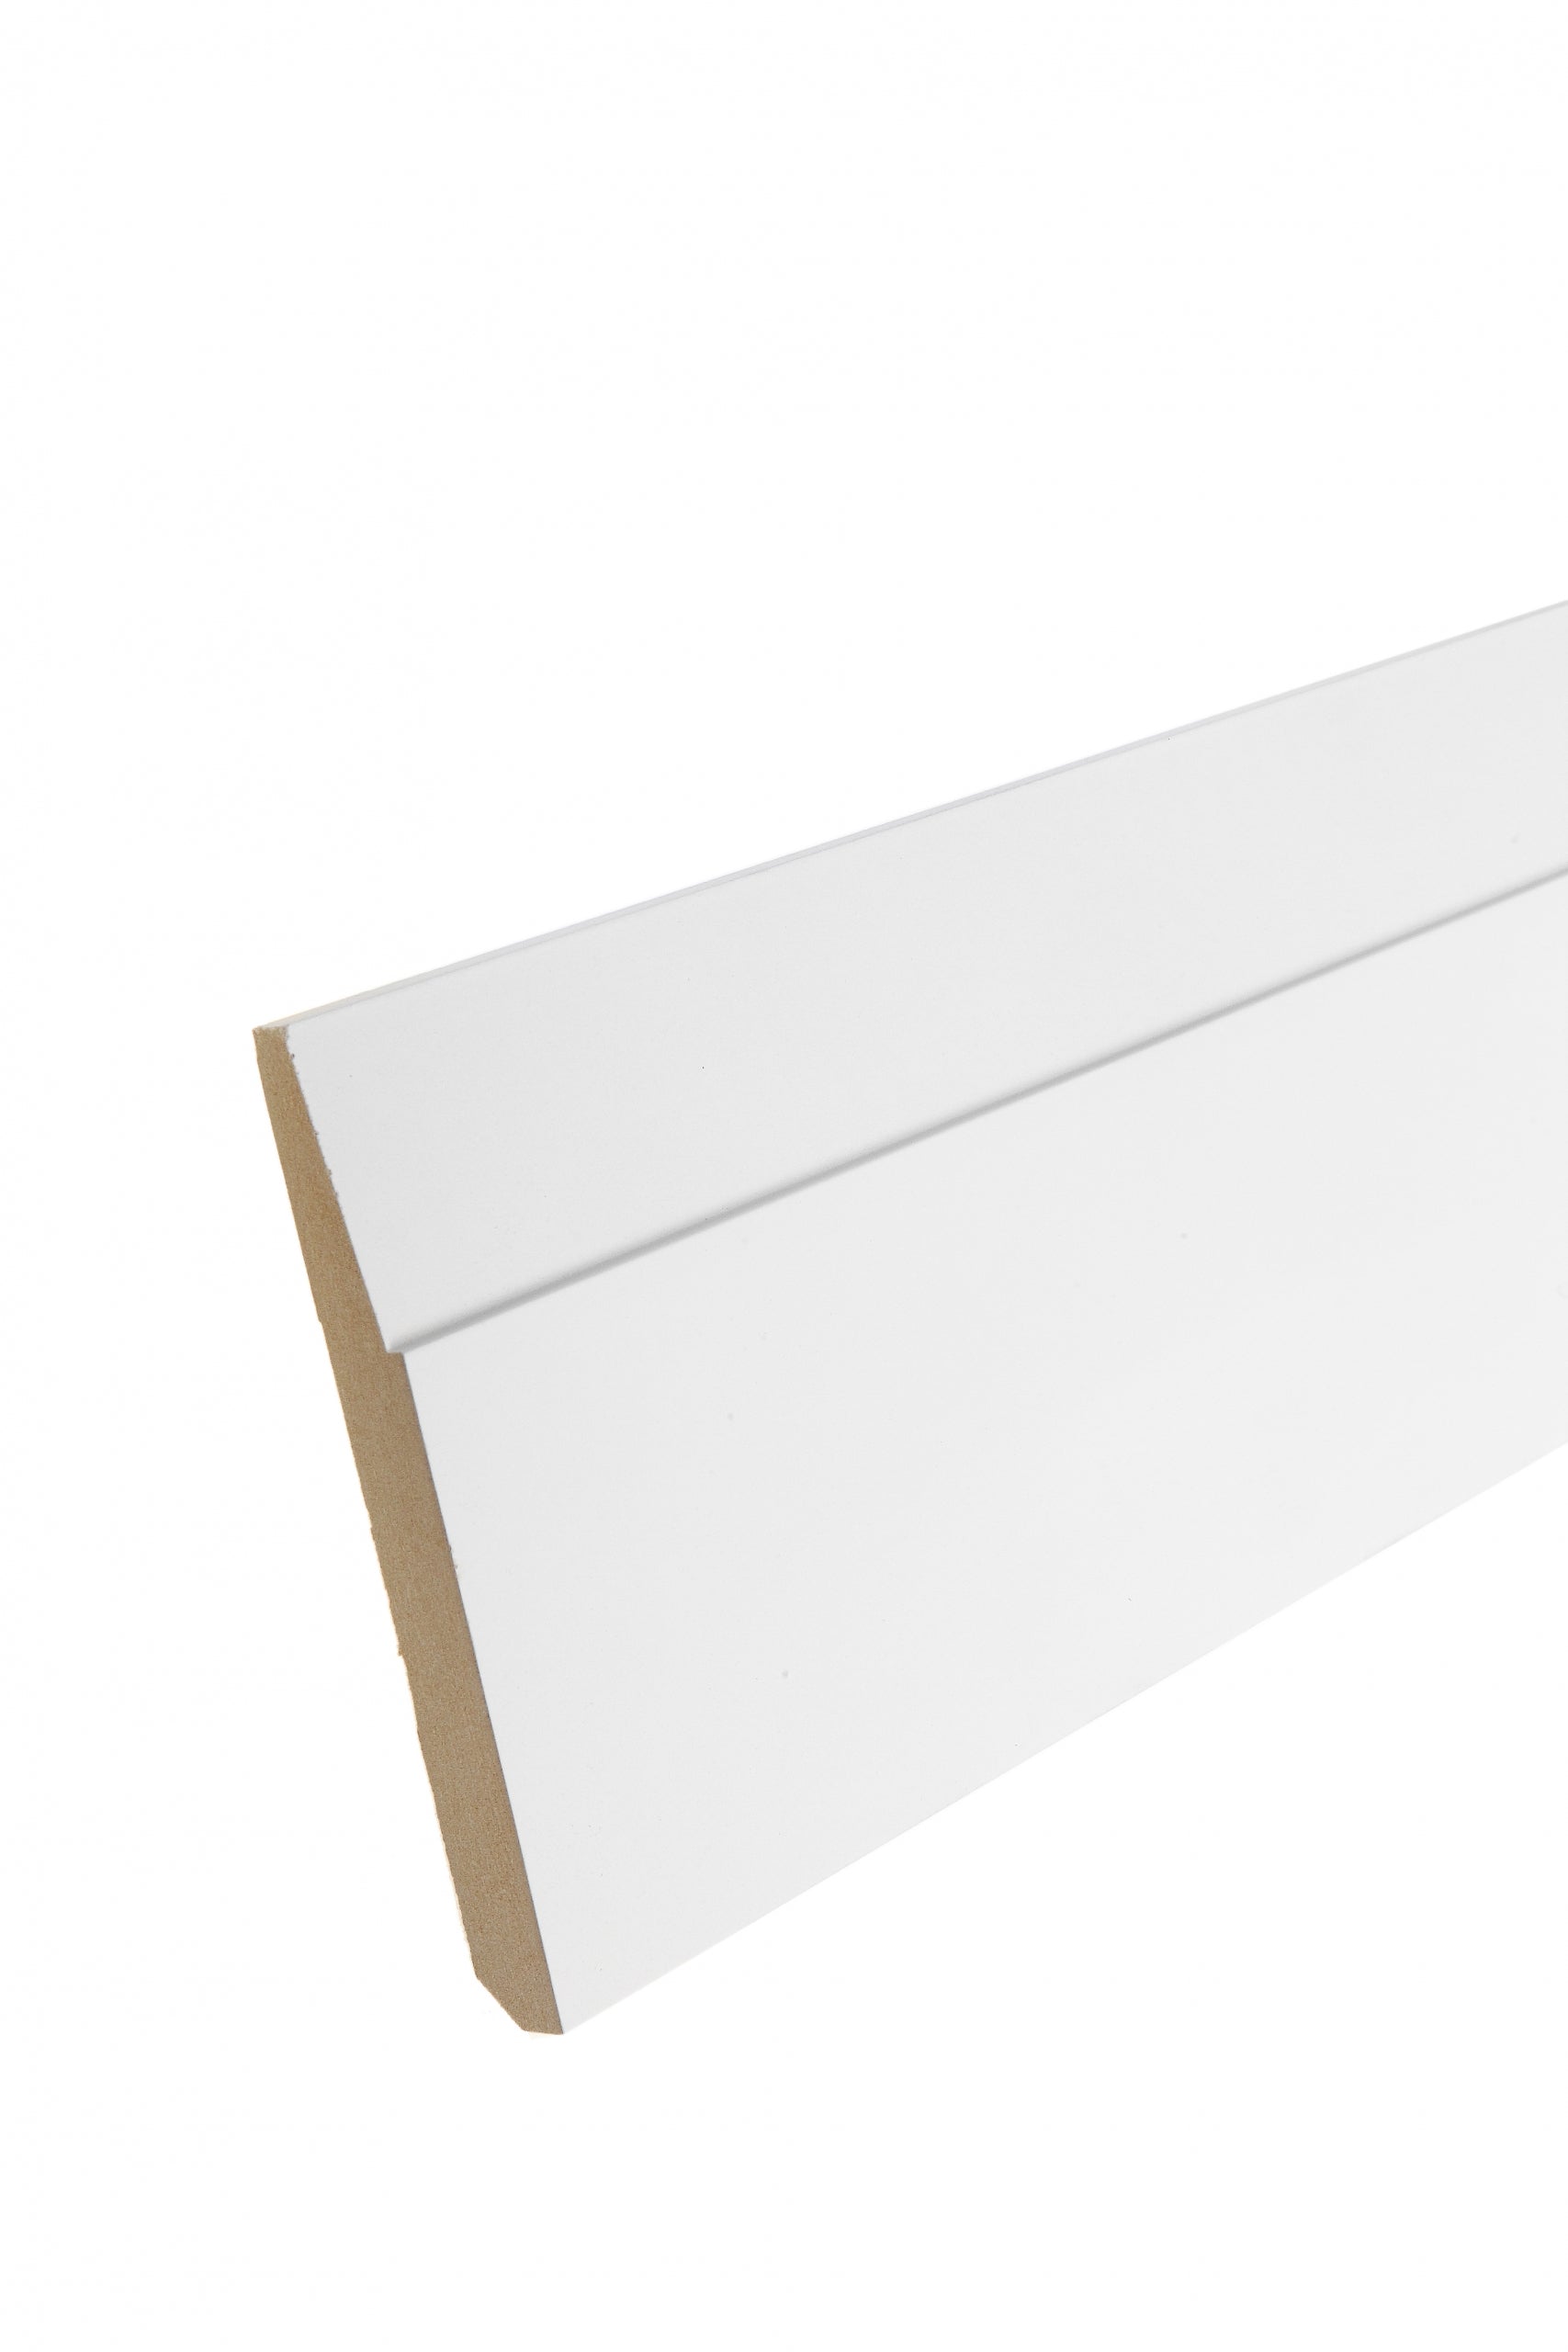 5 1/2"  Contemporary  Baseboard 8 foot lengths $2.49/LF